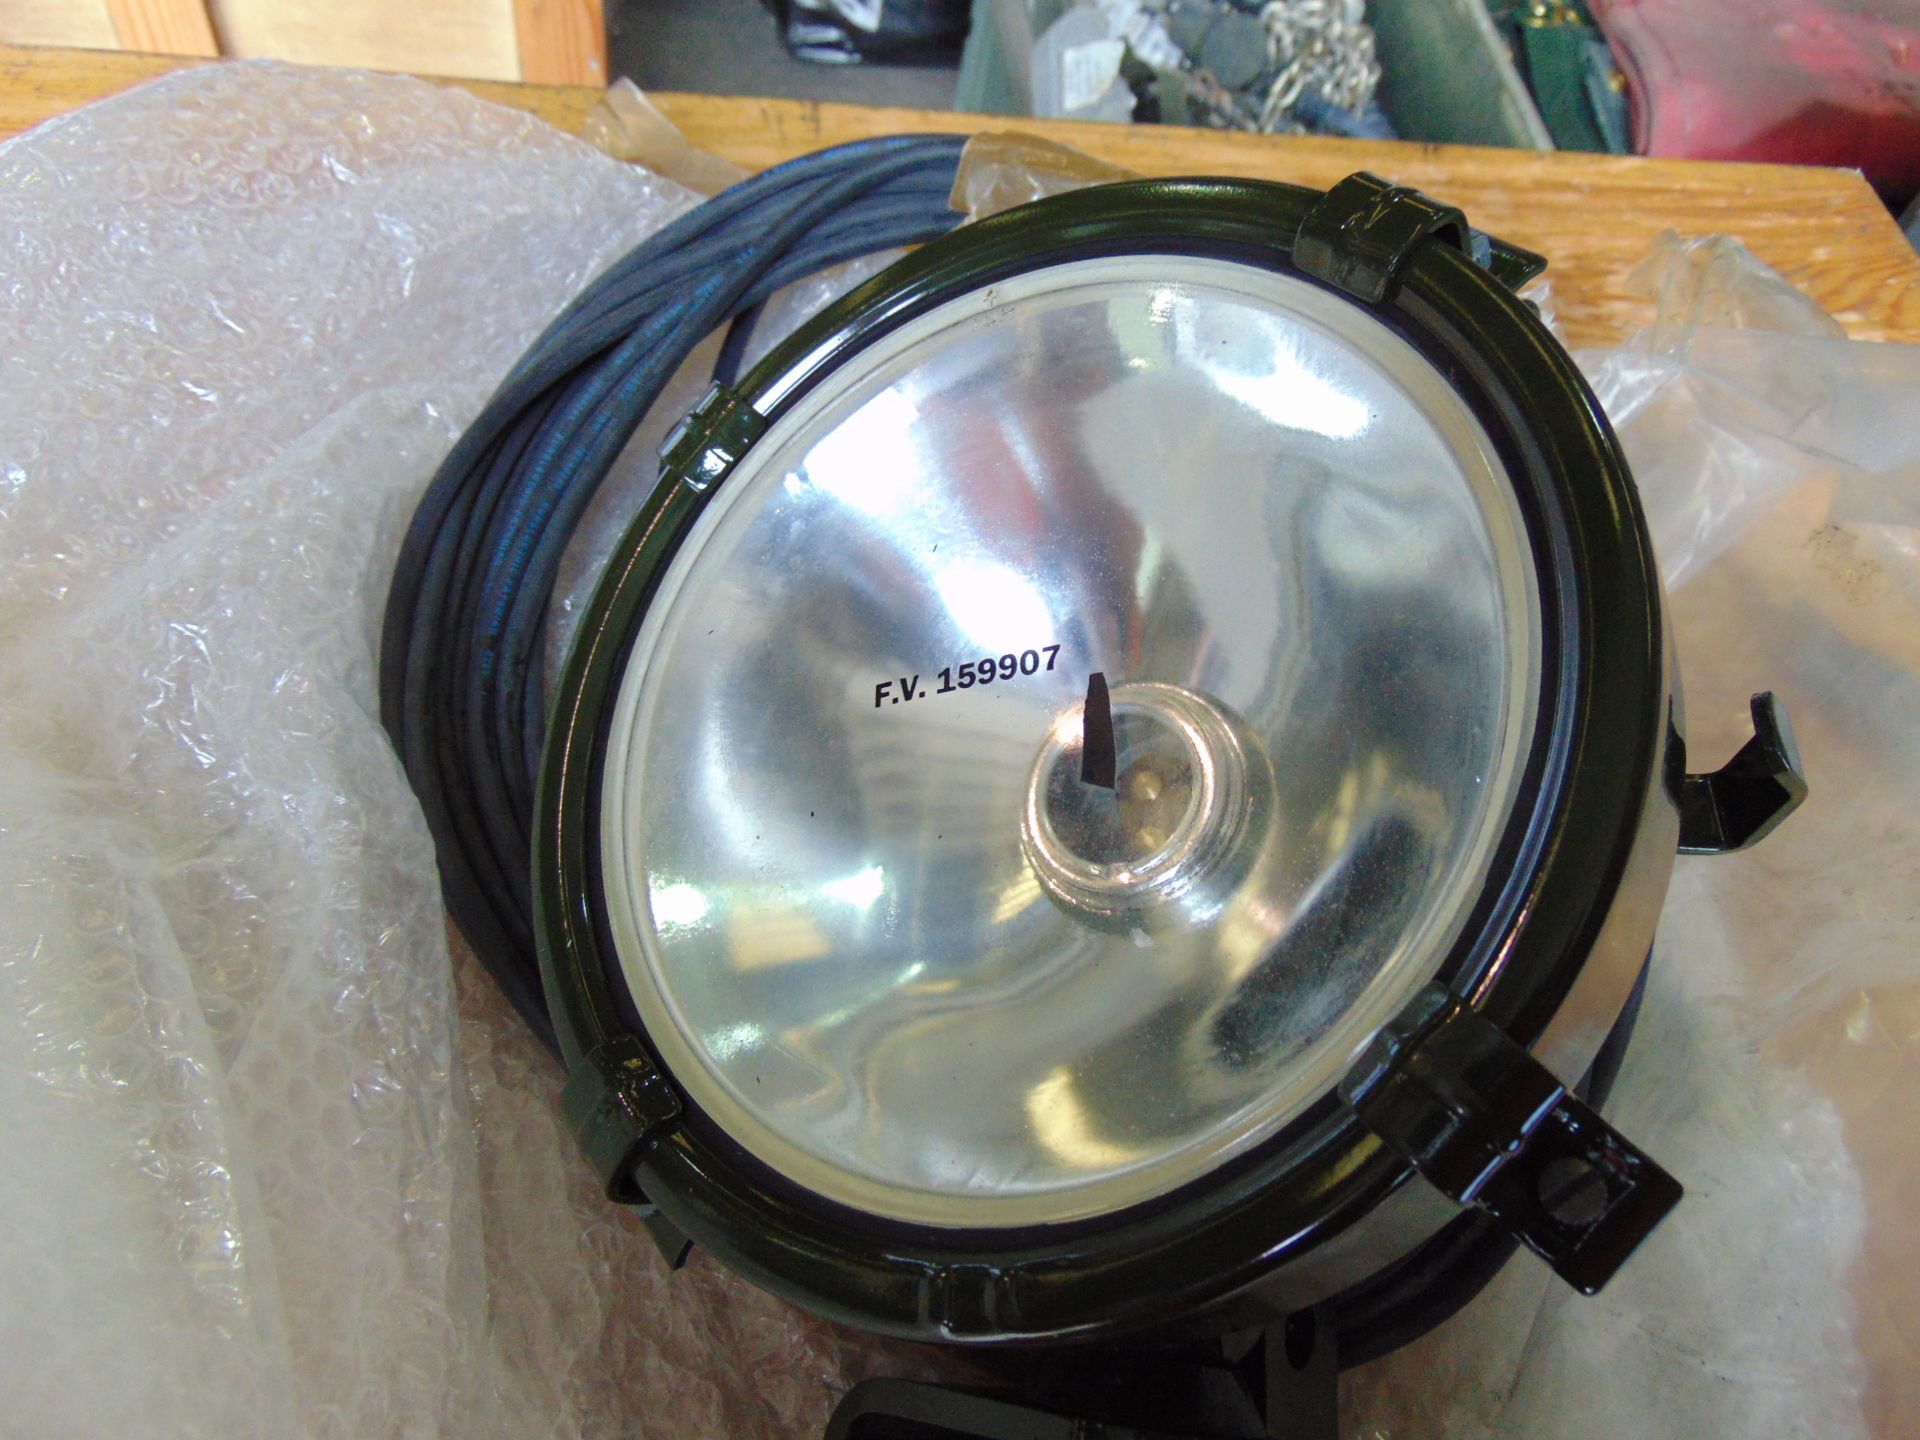 New Unissued FV159907 Vehicle Search Light c/w Plug and Mounting Brackets in Original Packing - Image 2 of 8